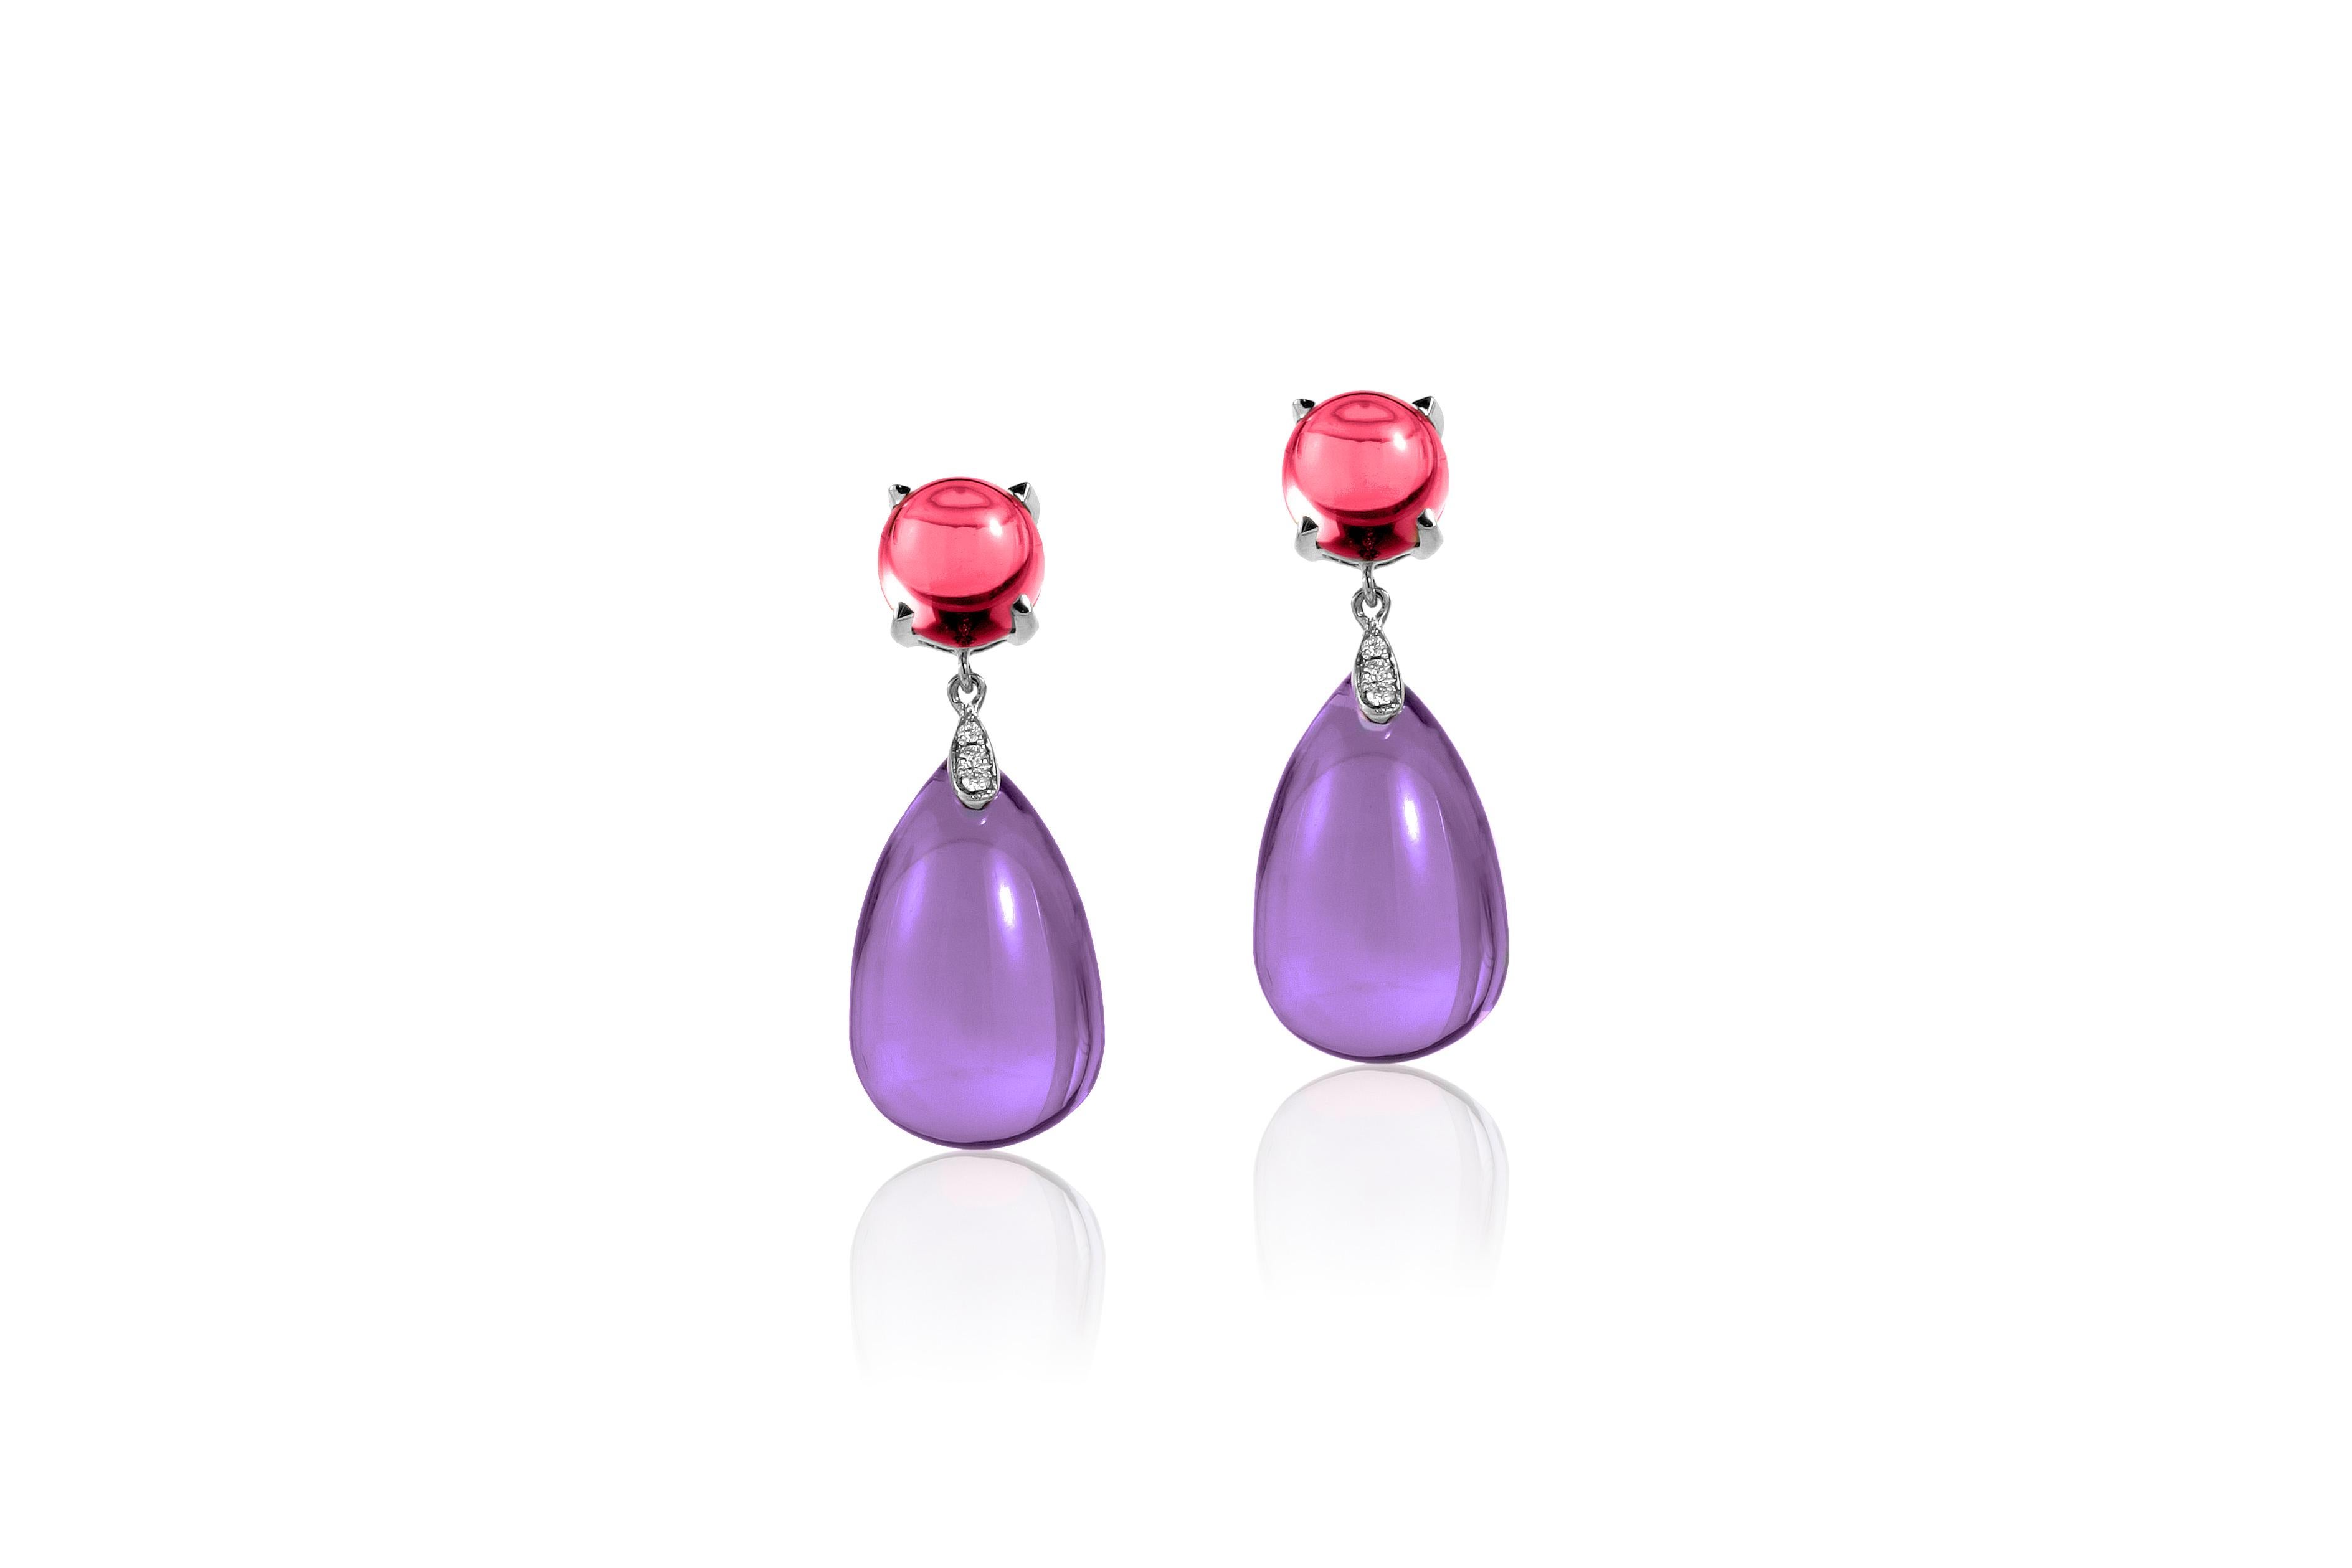 Amethyst - Rubelite Cabochon & Drop Earrings with Diamonds in 18K White Gold, from 'Naughty' Collection. This collection has dangerous curves tied with exotic colors. When unveiled, these pieces will bring a smile to the conservative aficionado.

*